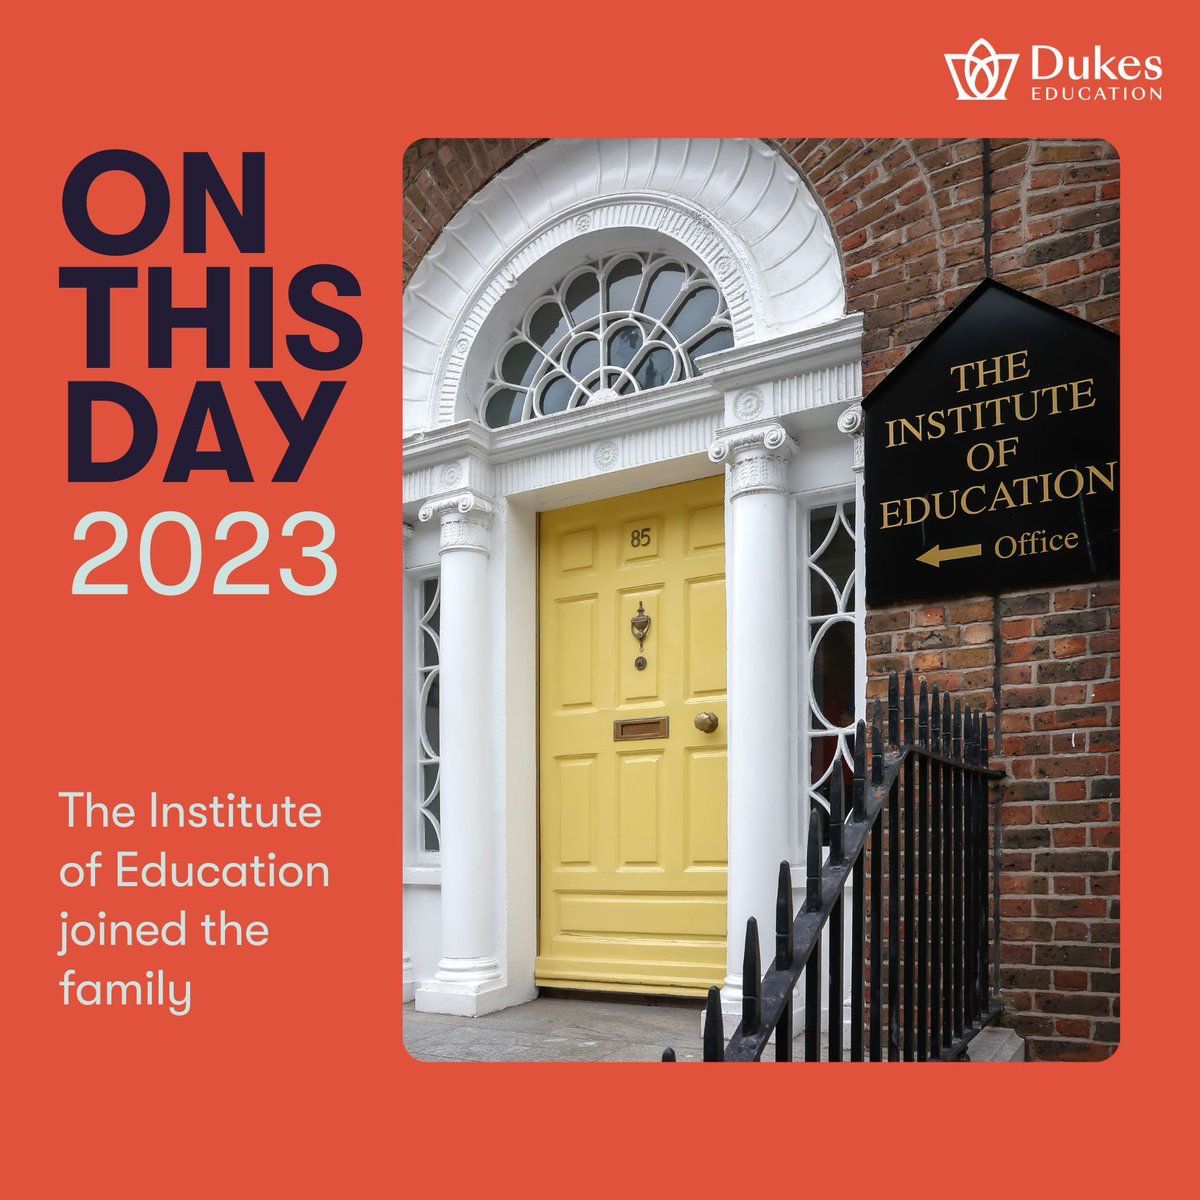 On this day in 2023, we welcomed The Institute of Education to the Dukes Education family. You can find out more about @IOE_Dublin by clicking here: buff.ly/3U30Yxz